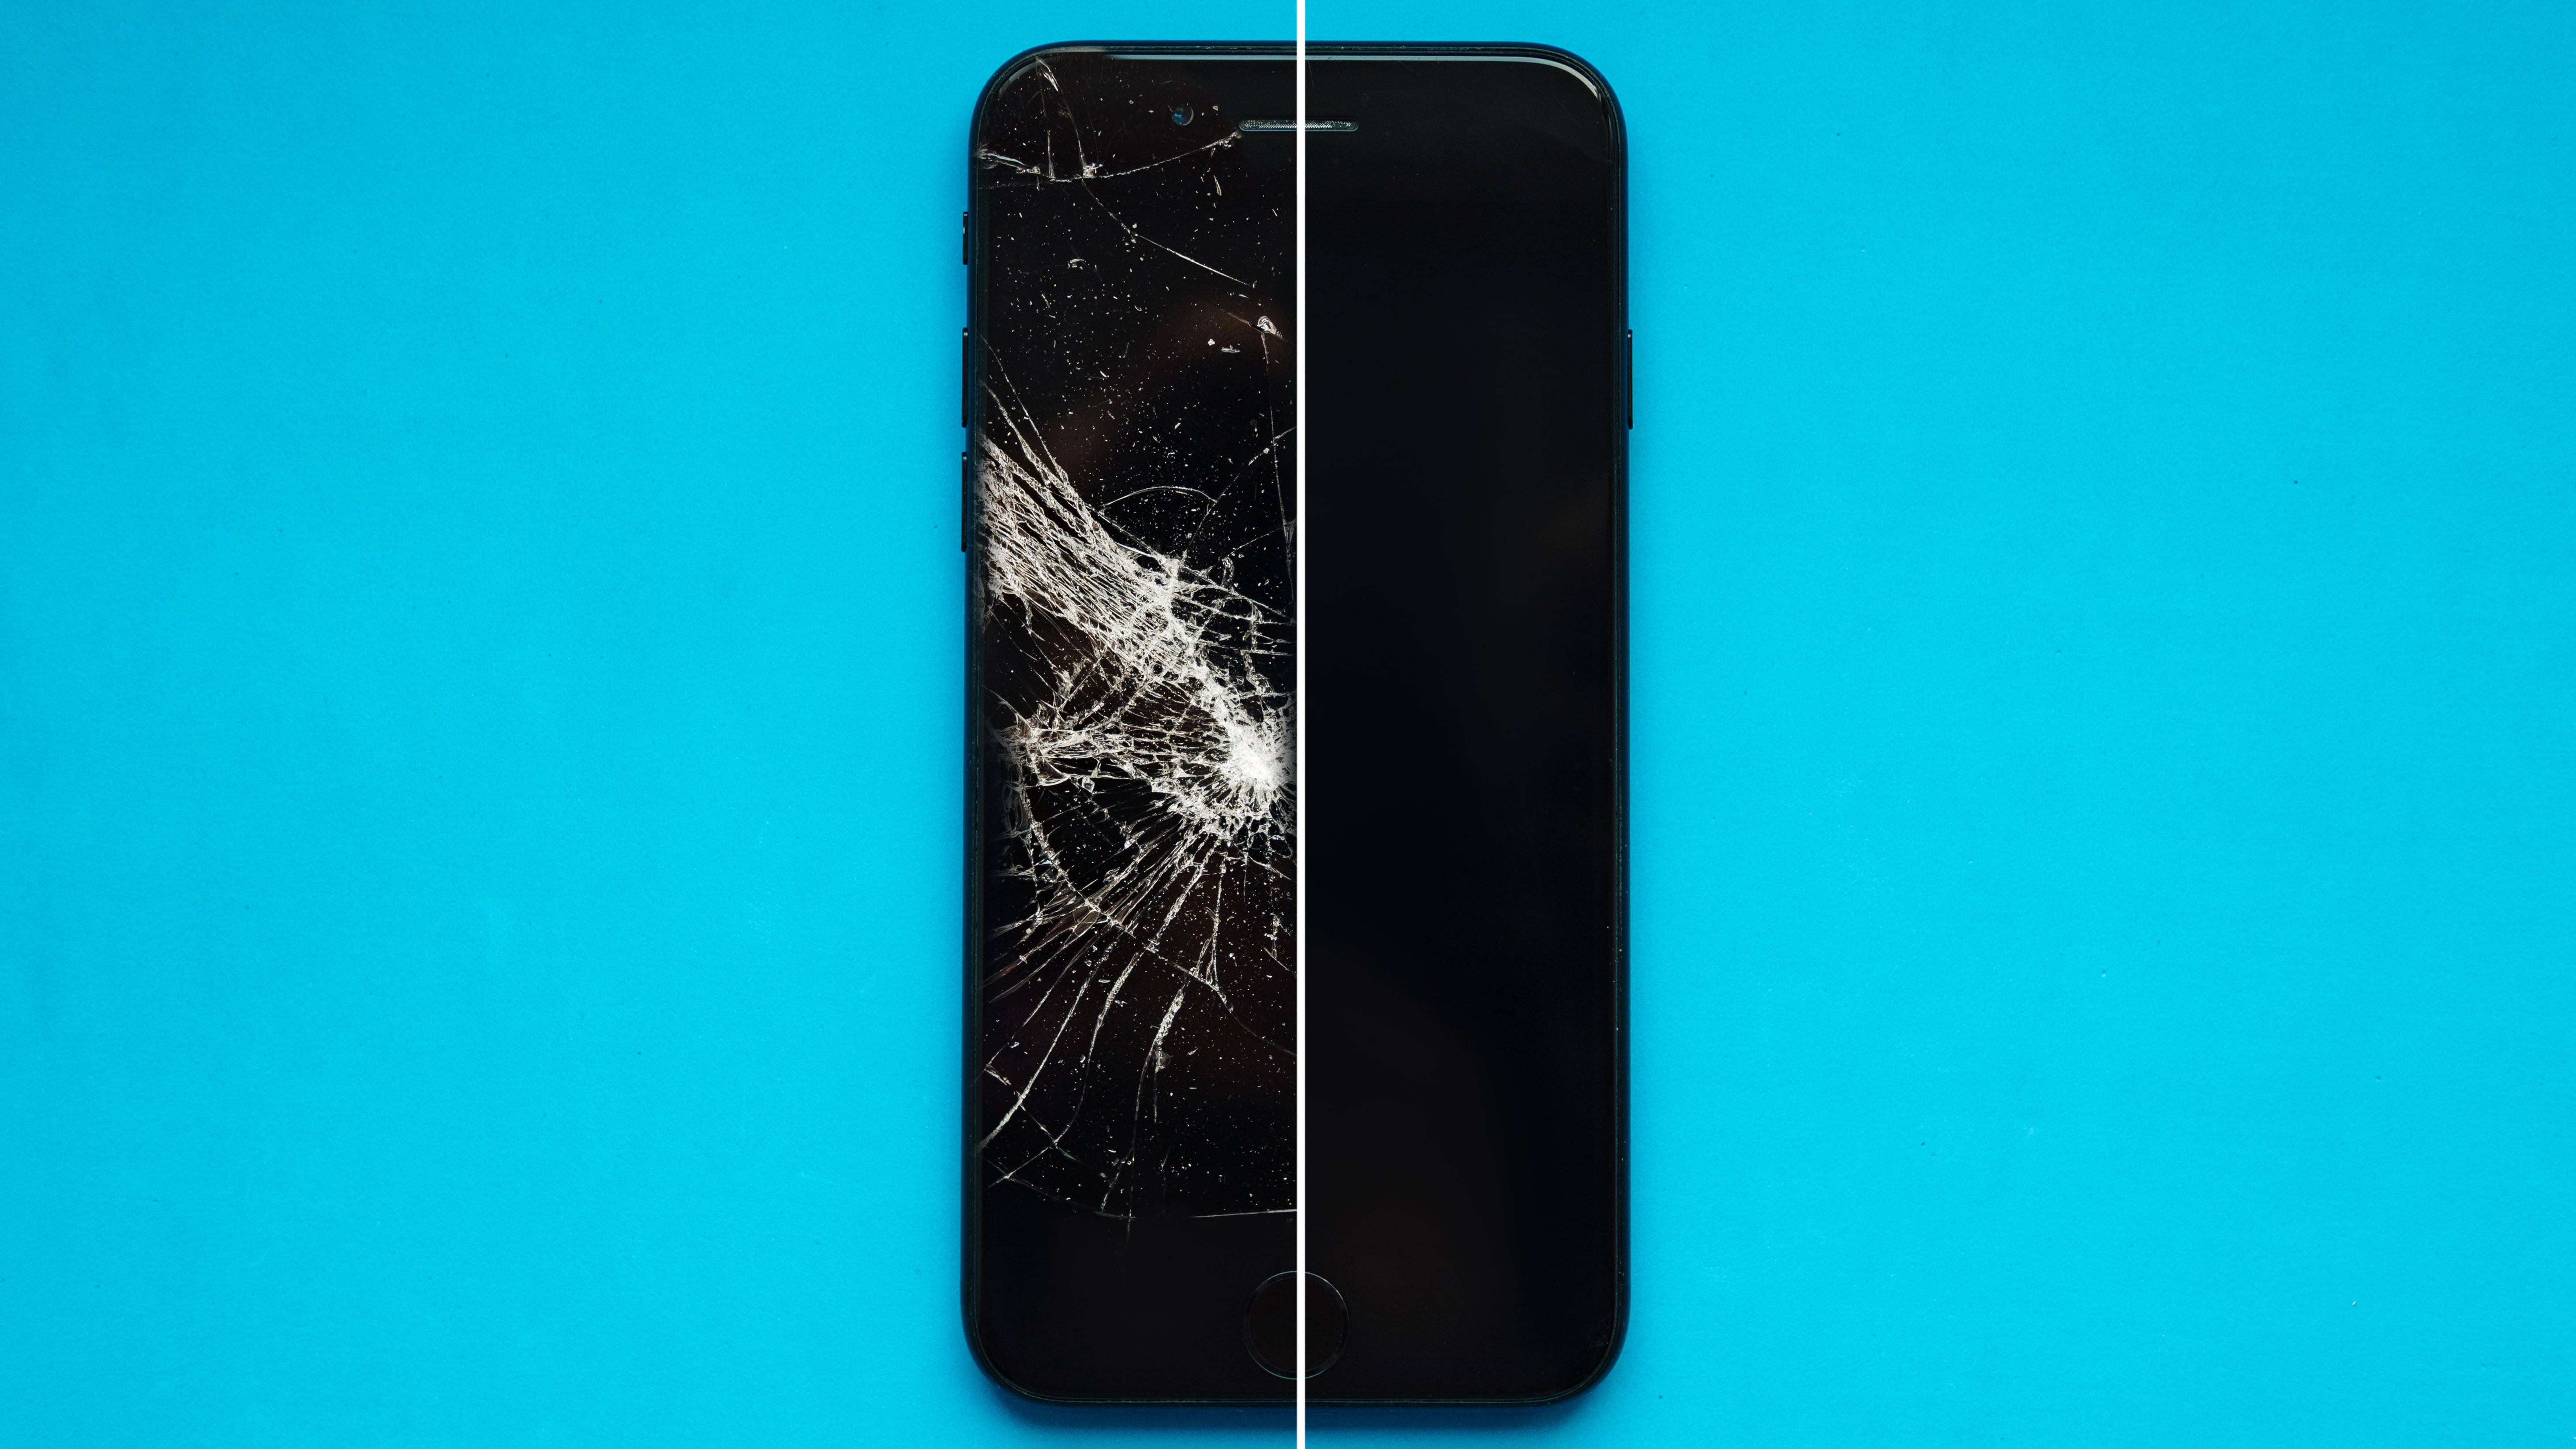 A broken iPhone on a blue background